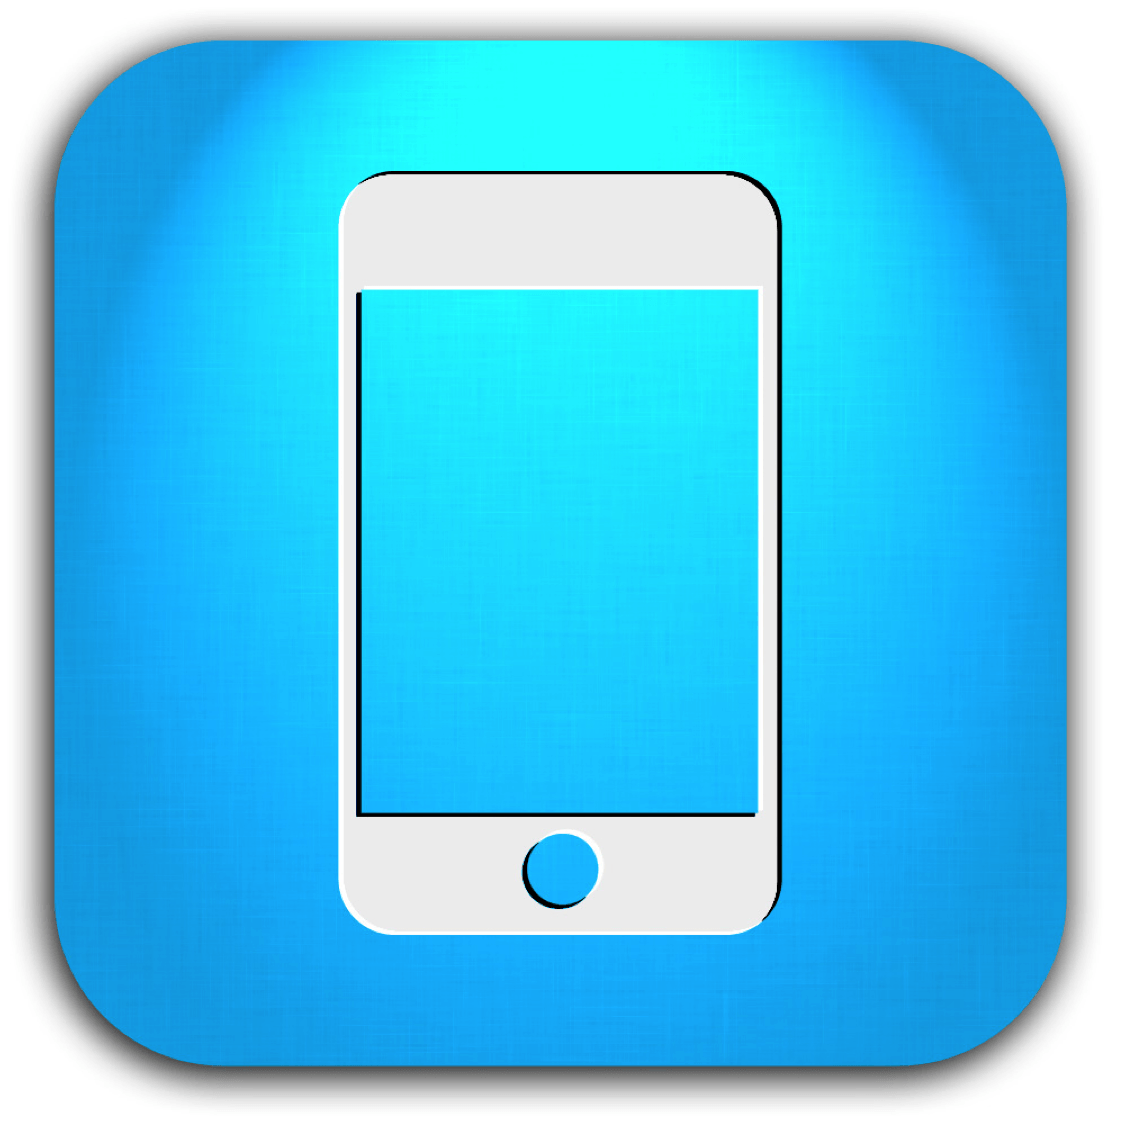 Cell Phone App Logo - Free Icon For Mobile 221900 | Download Icon For Mobile - 221900